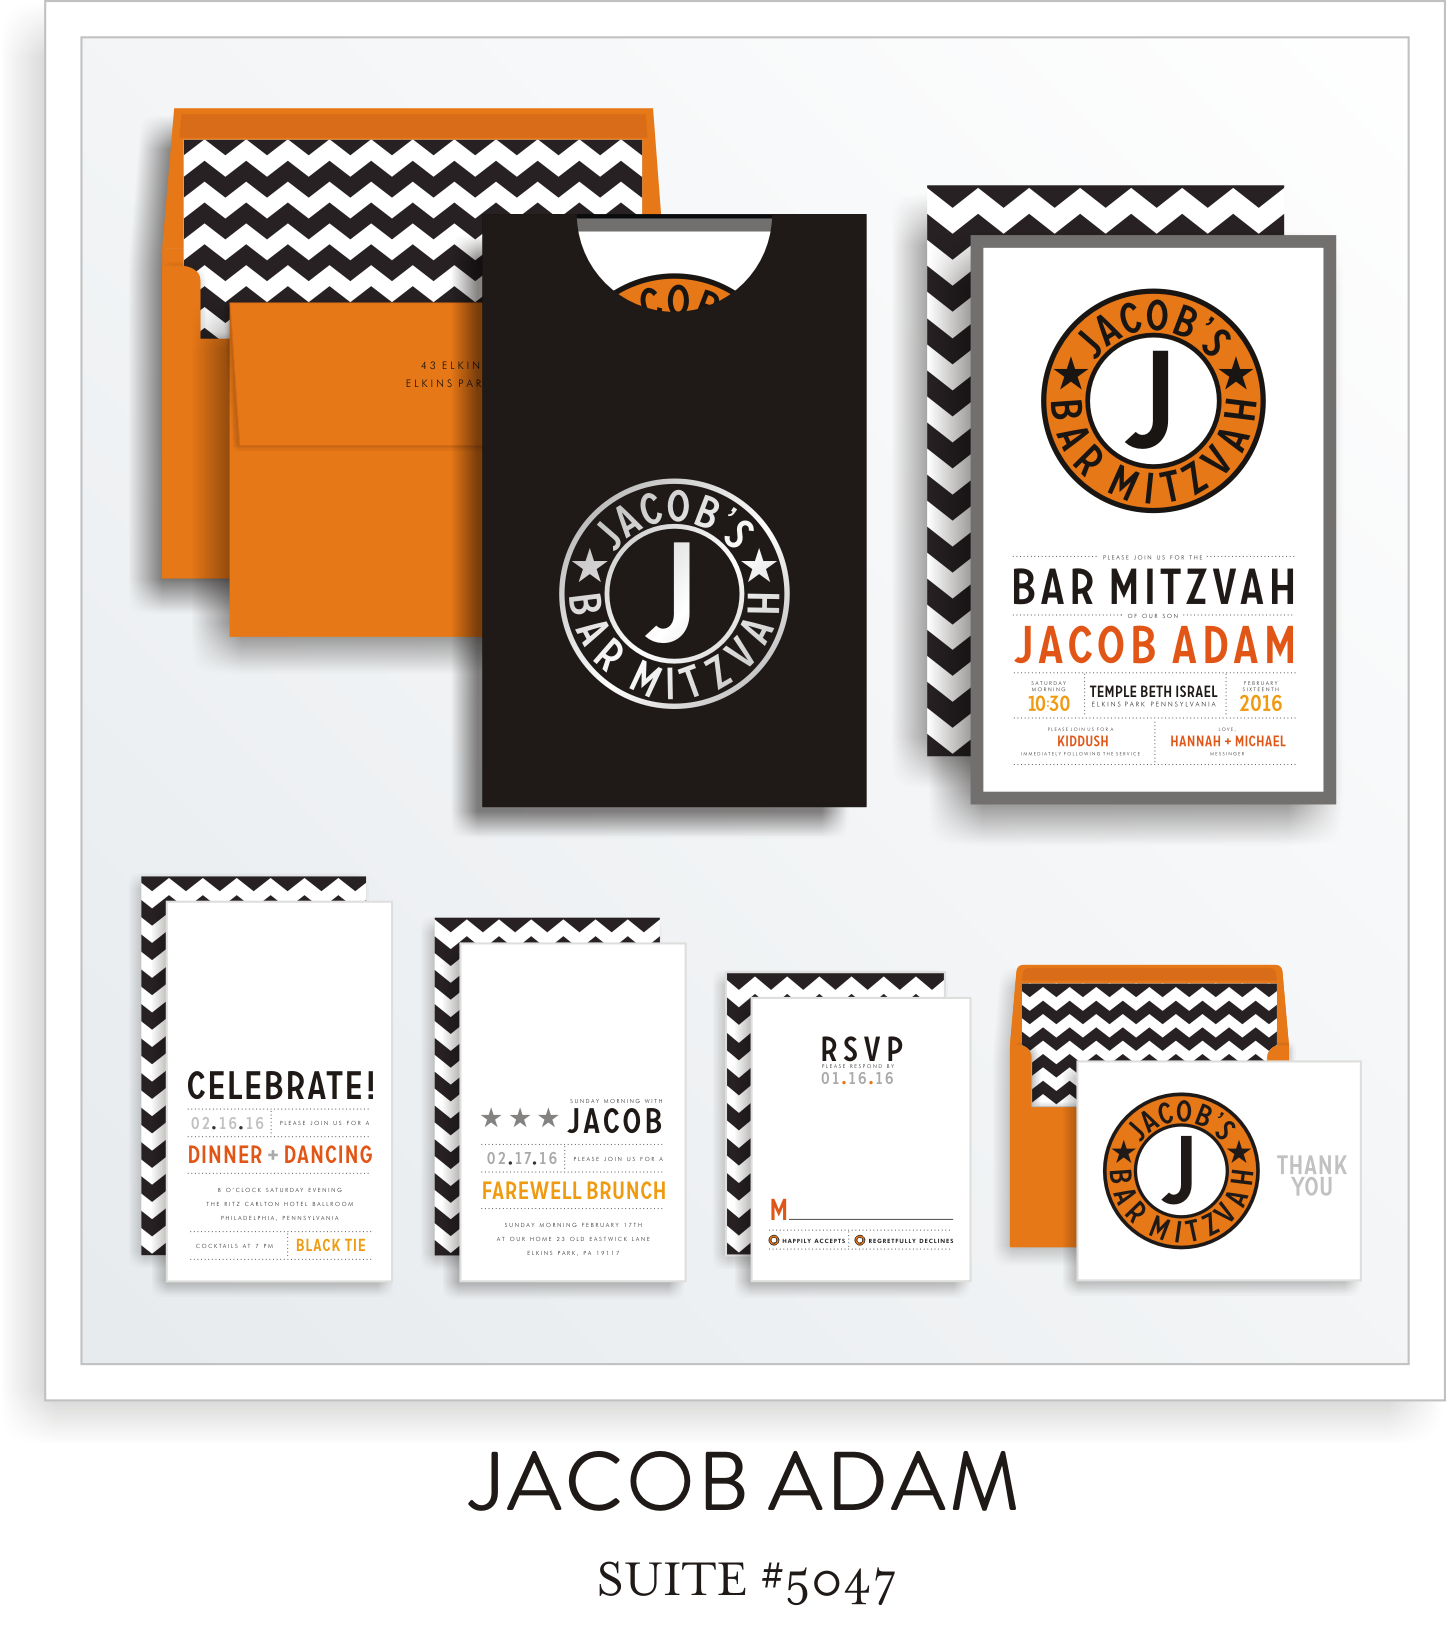 Copy of Copy of <a href=/bar-mitzvah-invitations-5047>Suite Details→</a><strong><a href=/jacob-adam-in-colors>see more colors→</a></strong>